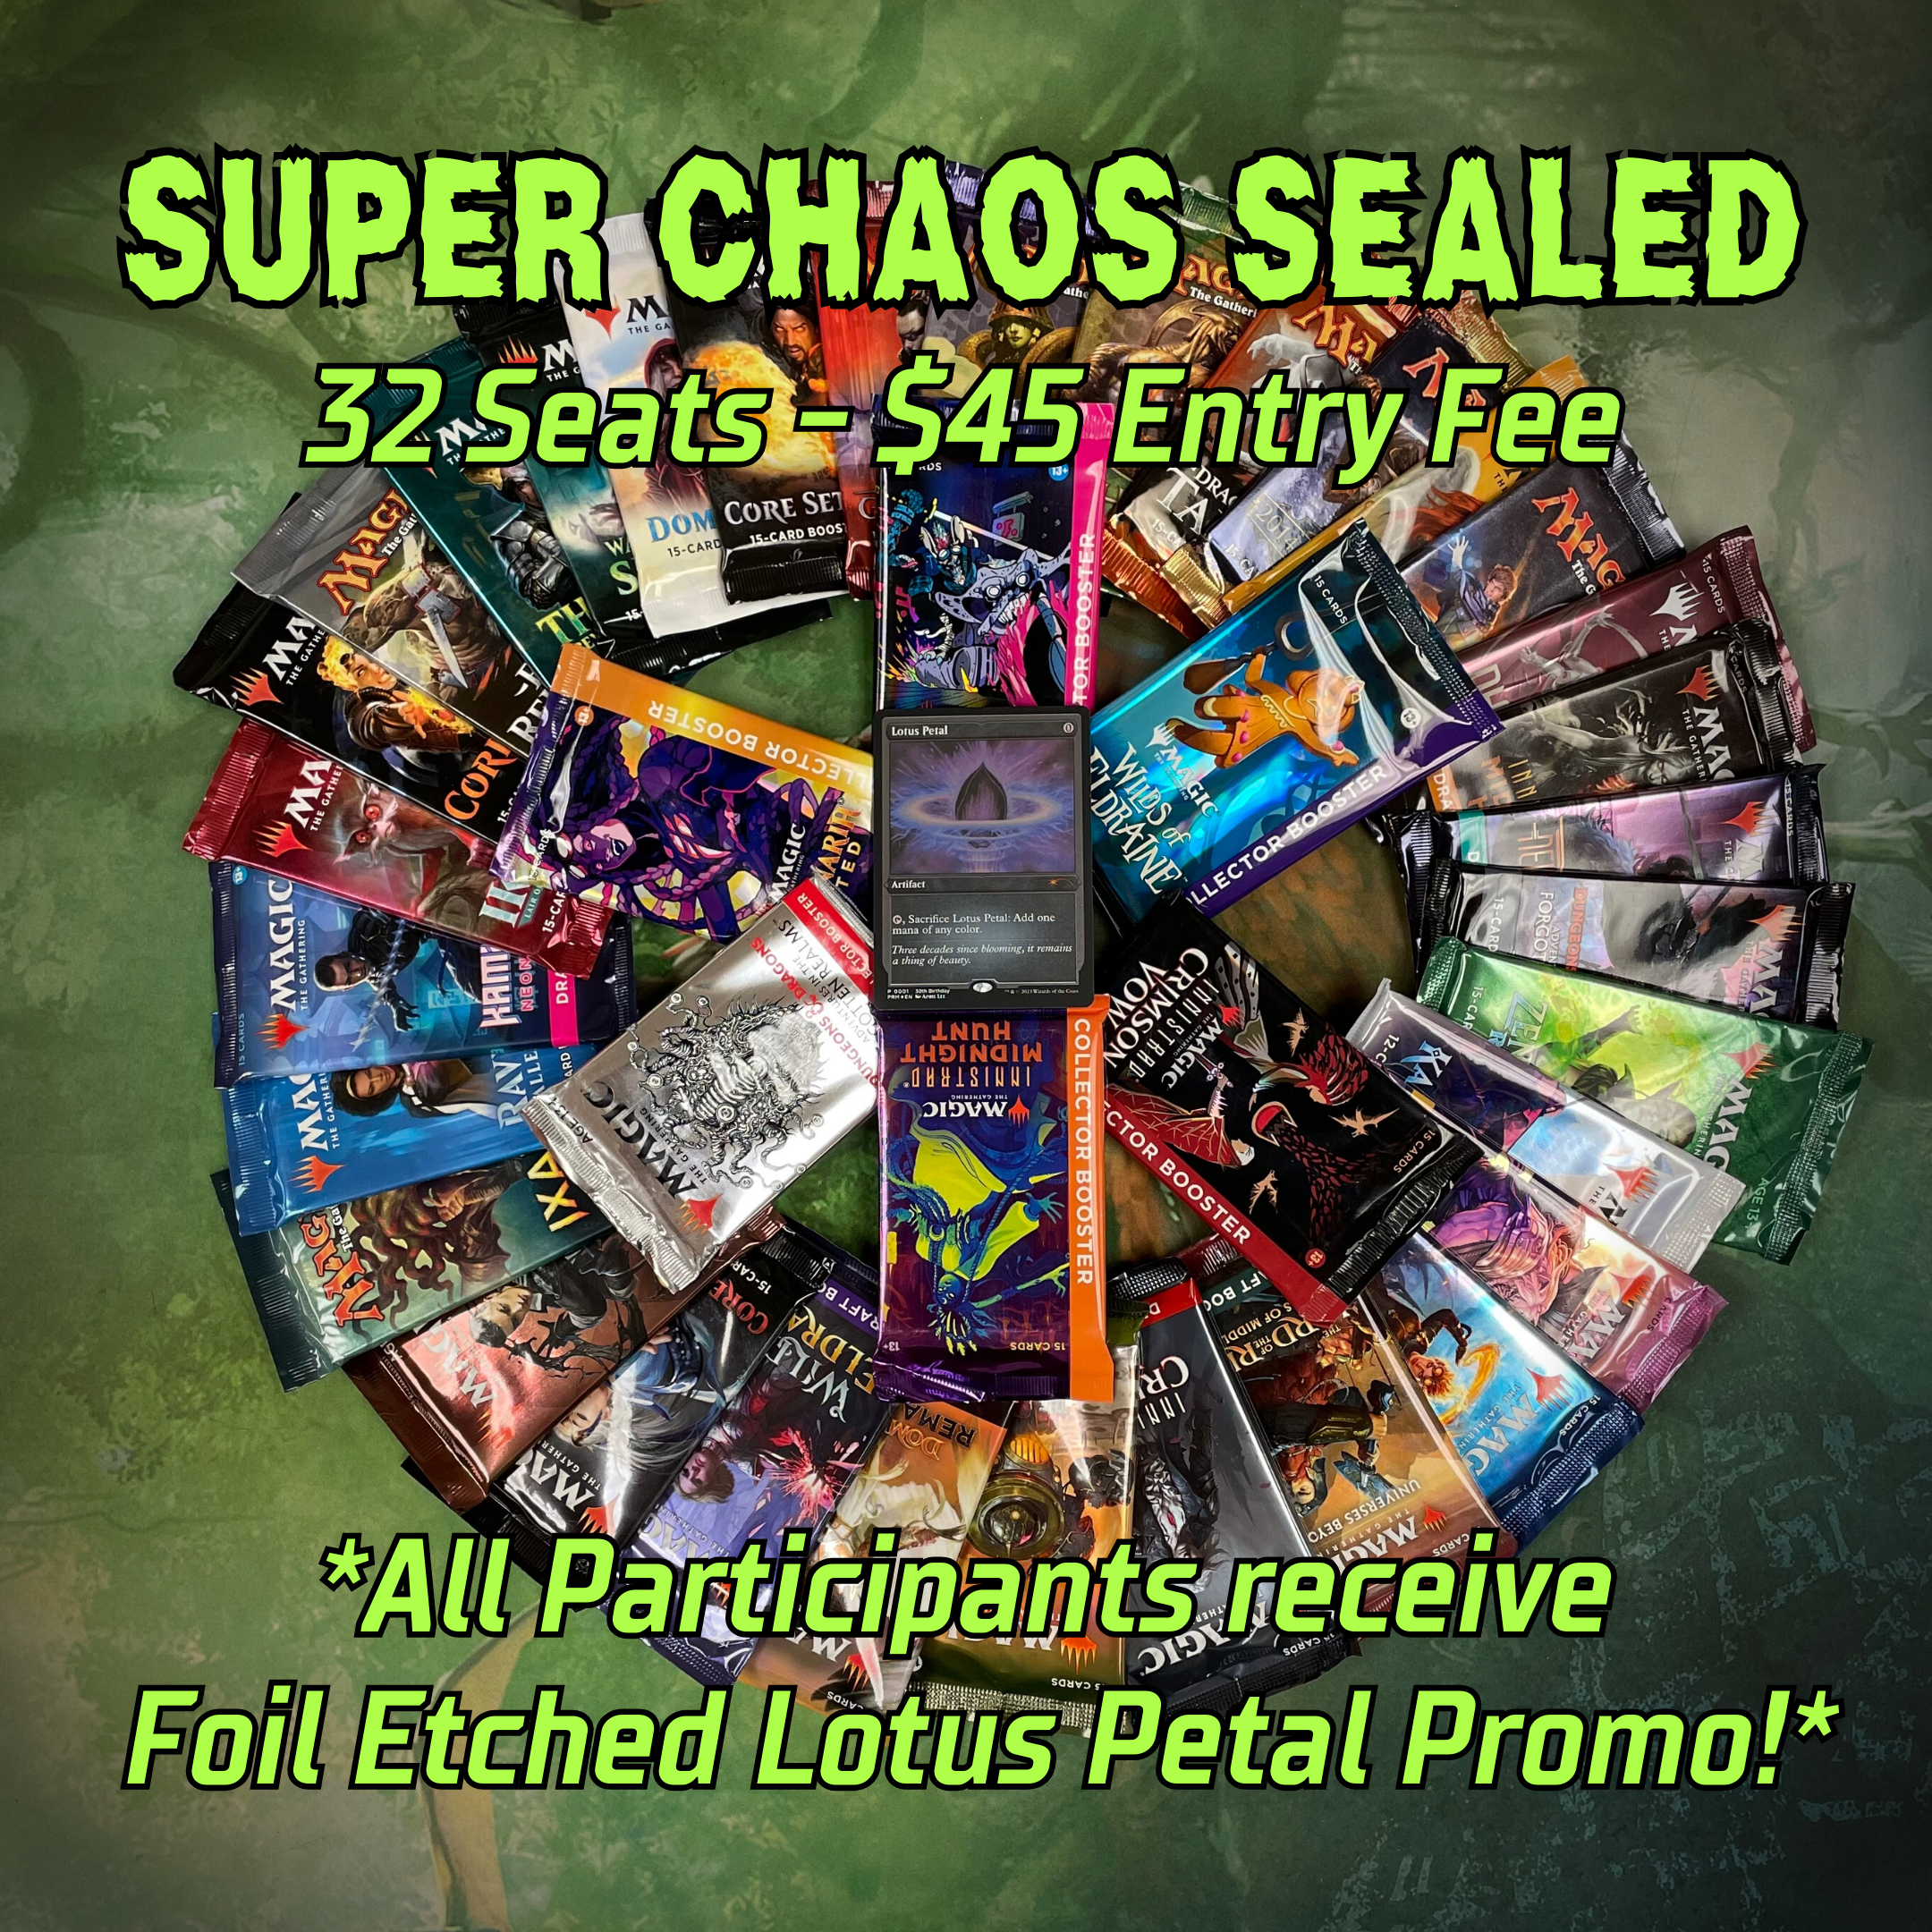 (10/01) Super Chaos Sealed!